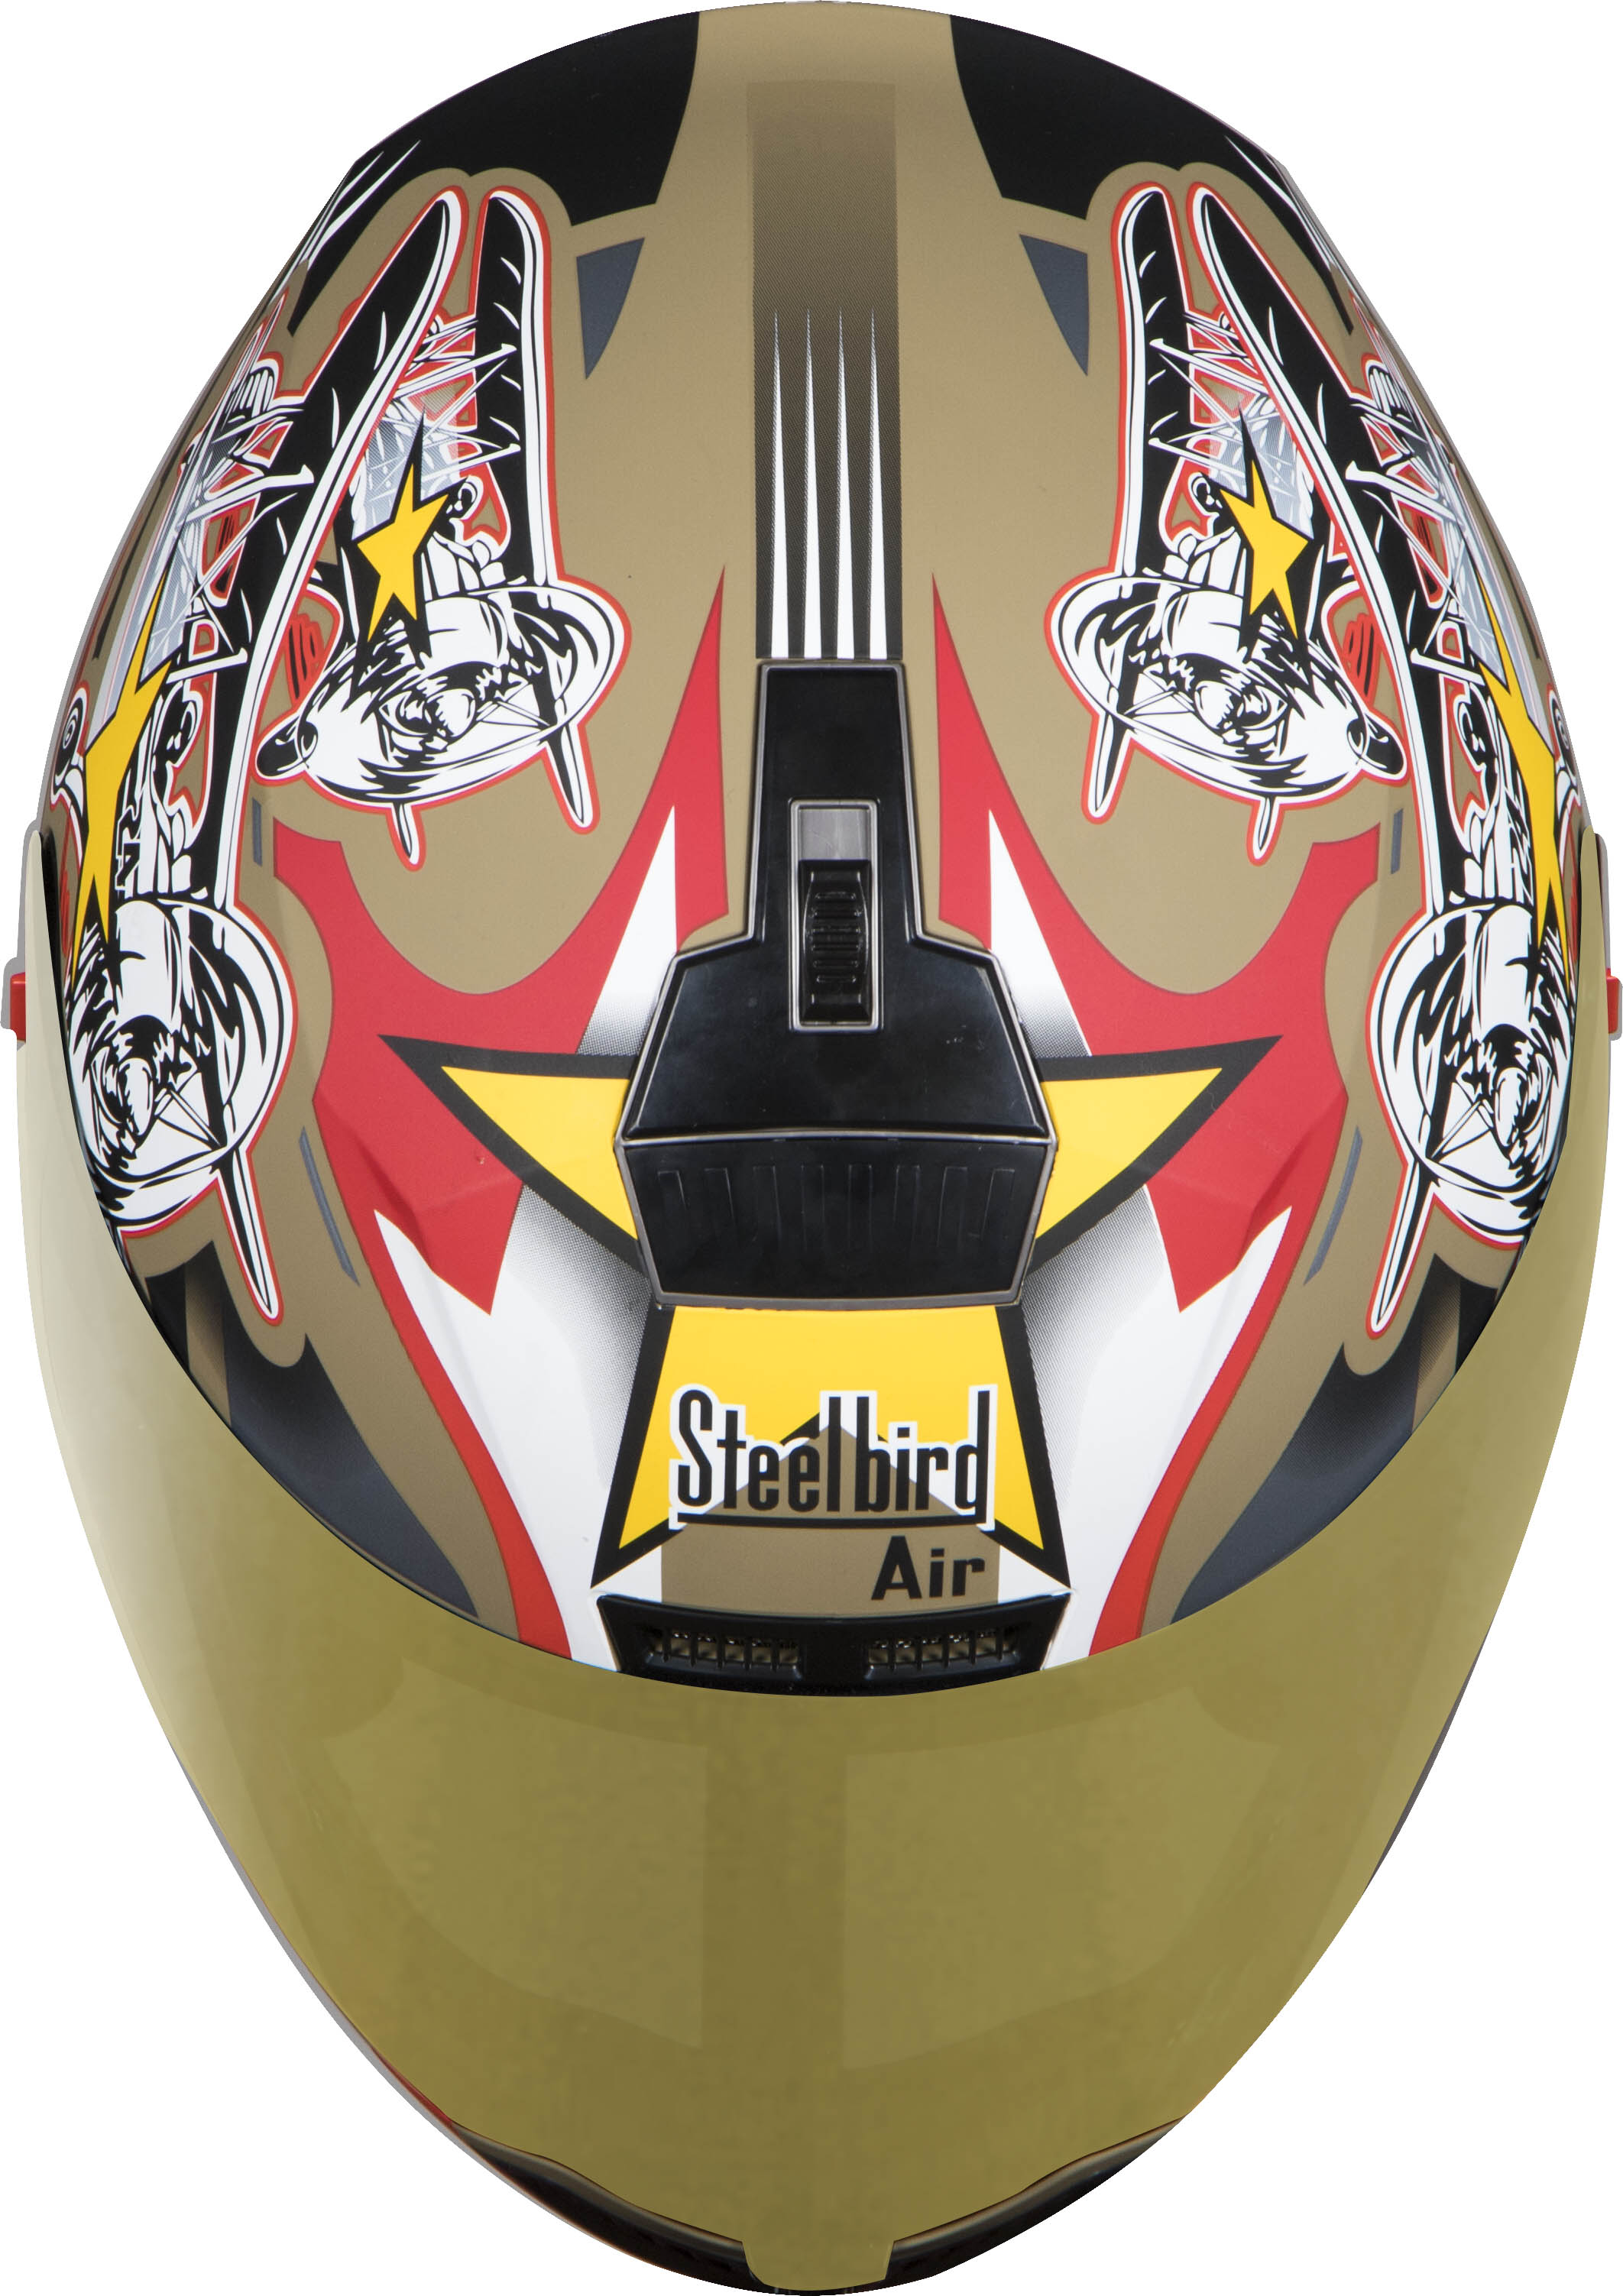 SBA-1 Hovering Mat Desert Storm With Red ( Fitted With Clear Visor  Extra Gold Chrome Visor Free)